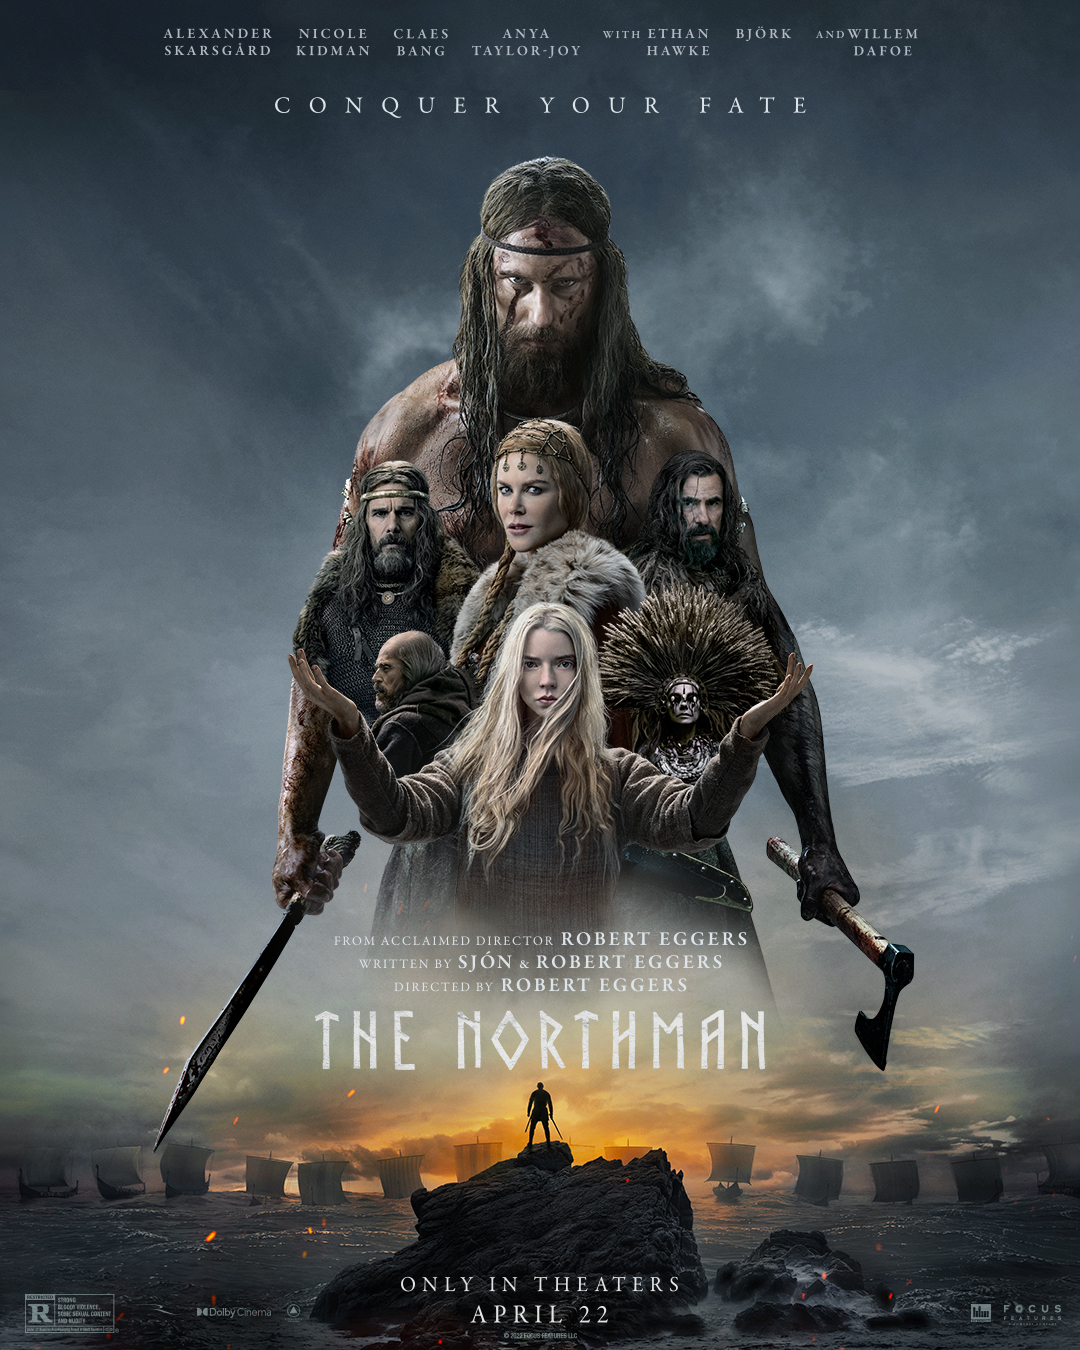 Focus Feature Shares The Official Poster Of The Northman